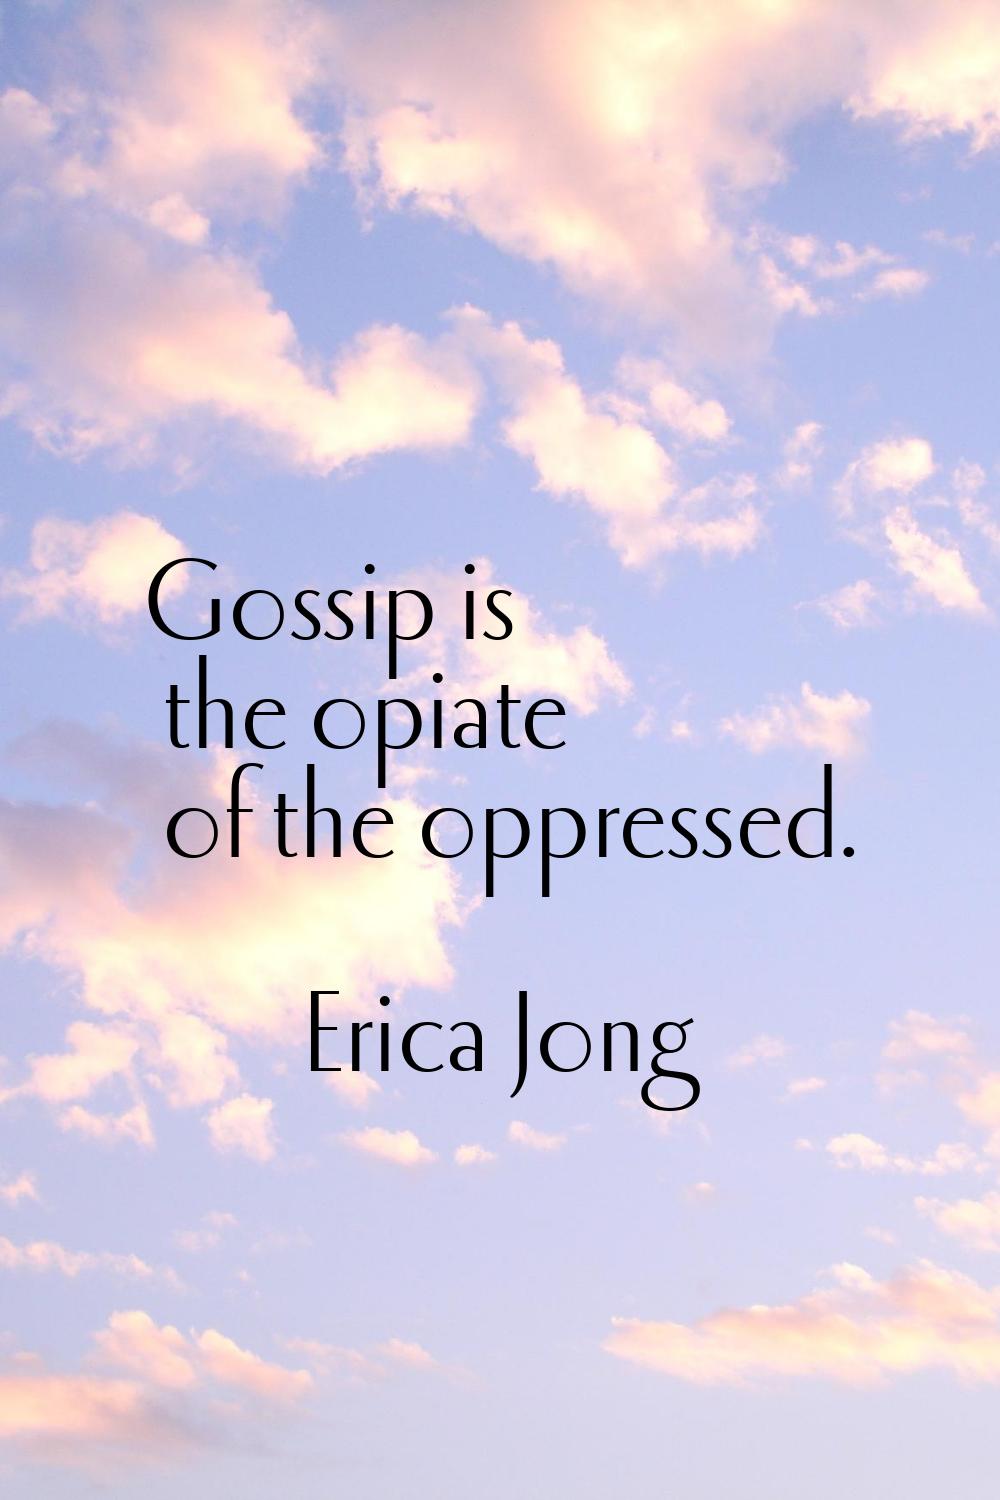 Gossip is the opiate of the oppressed.